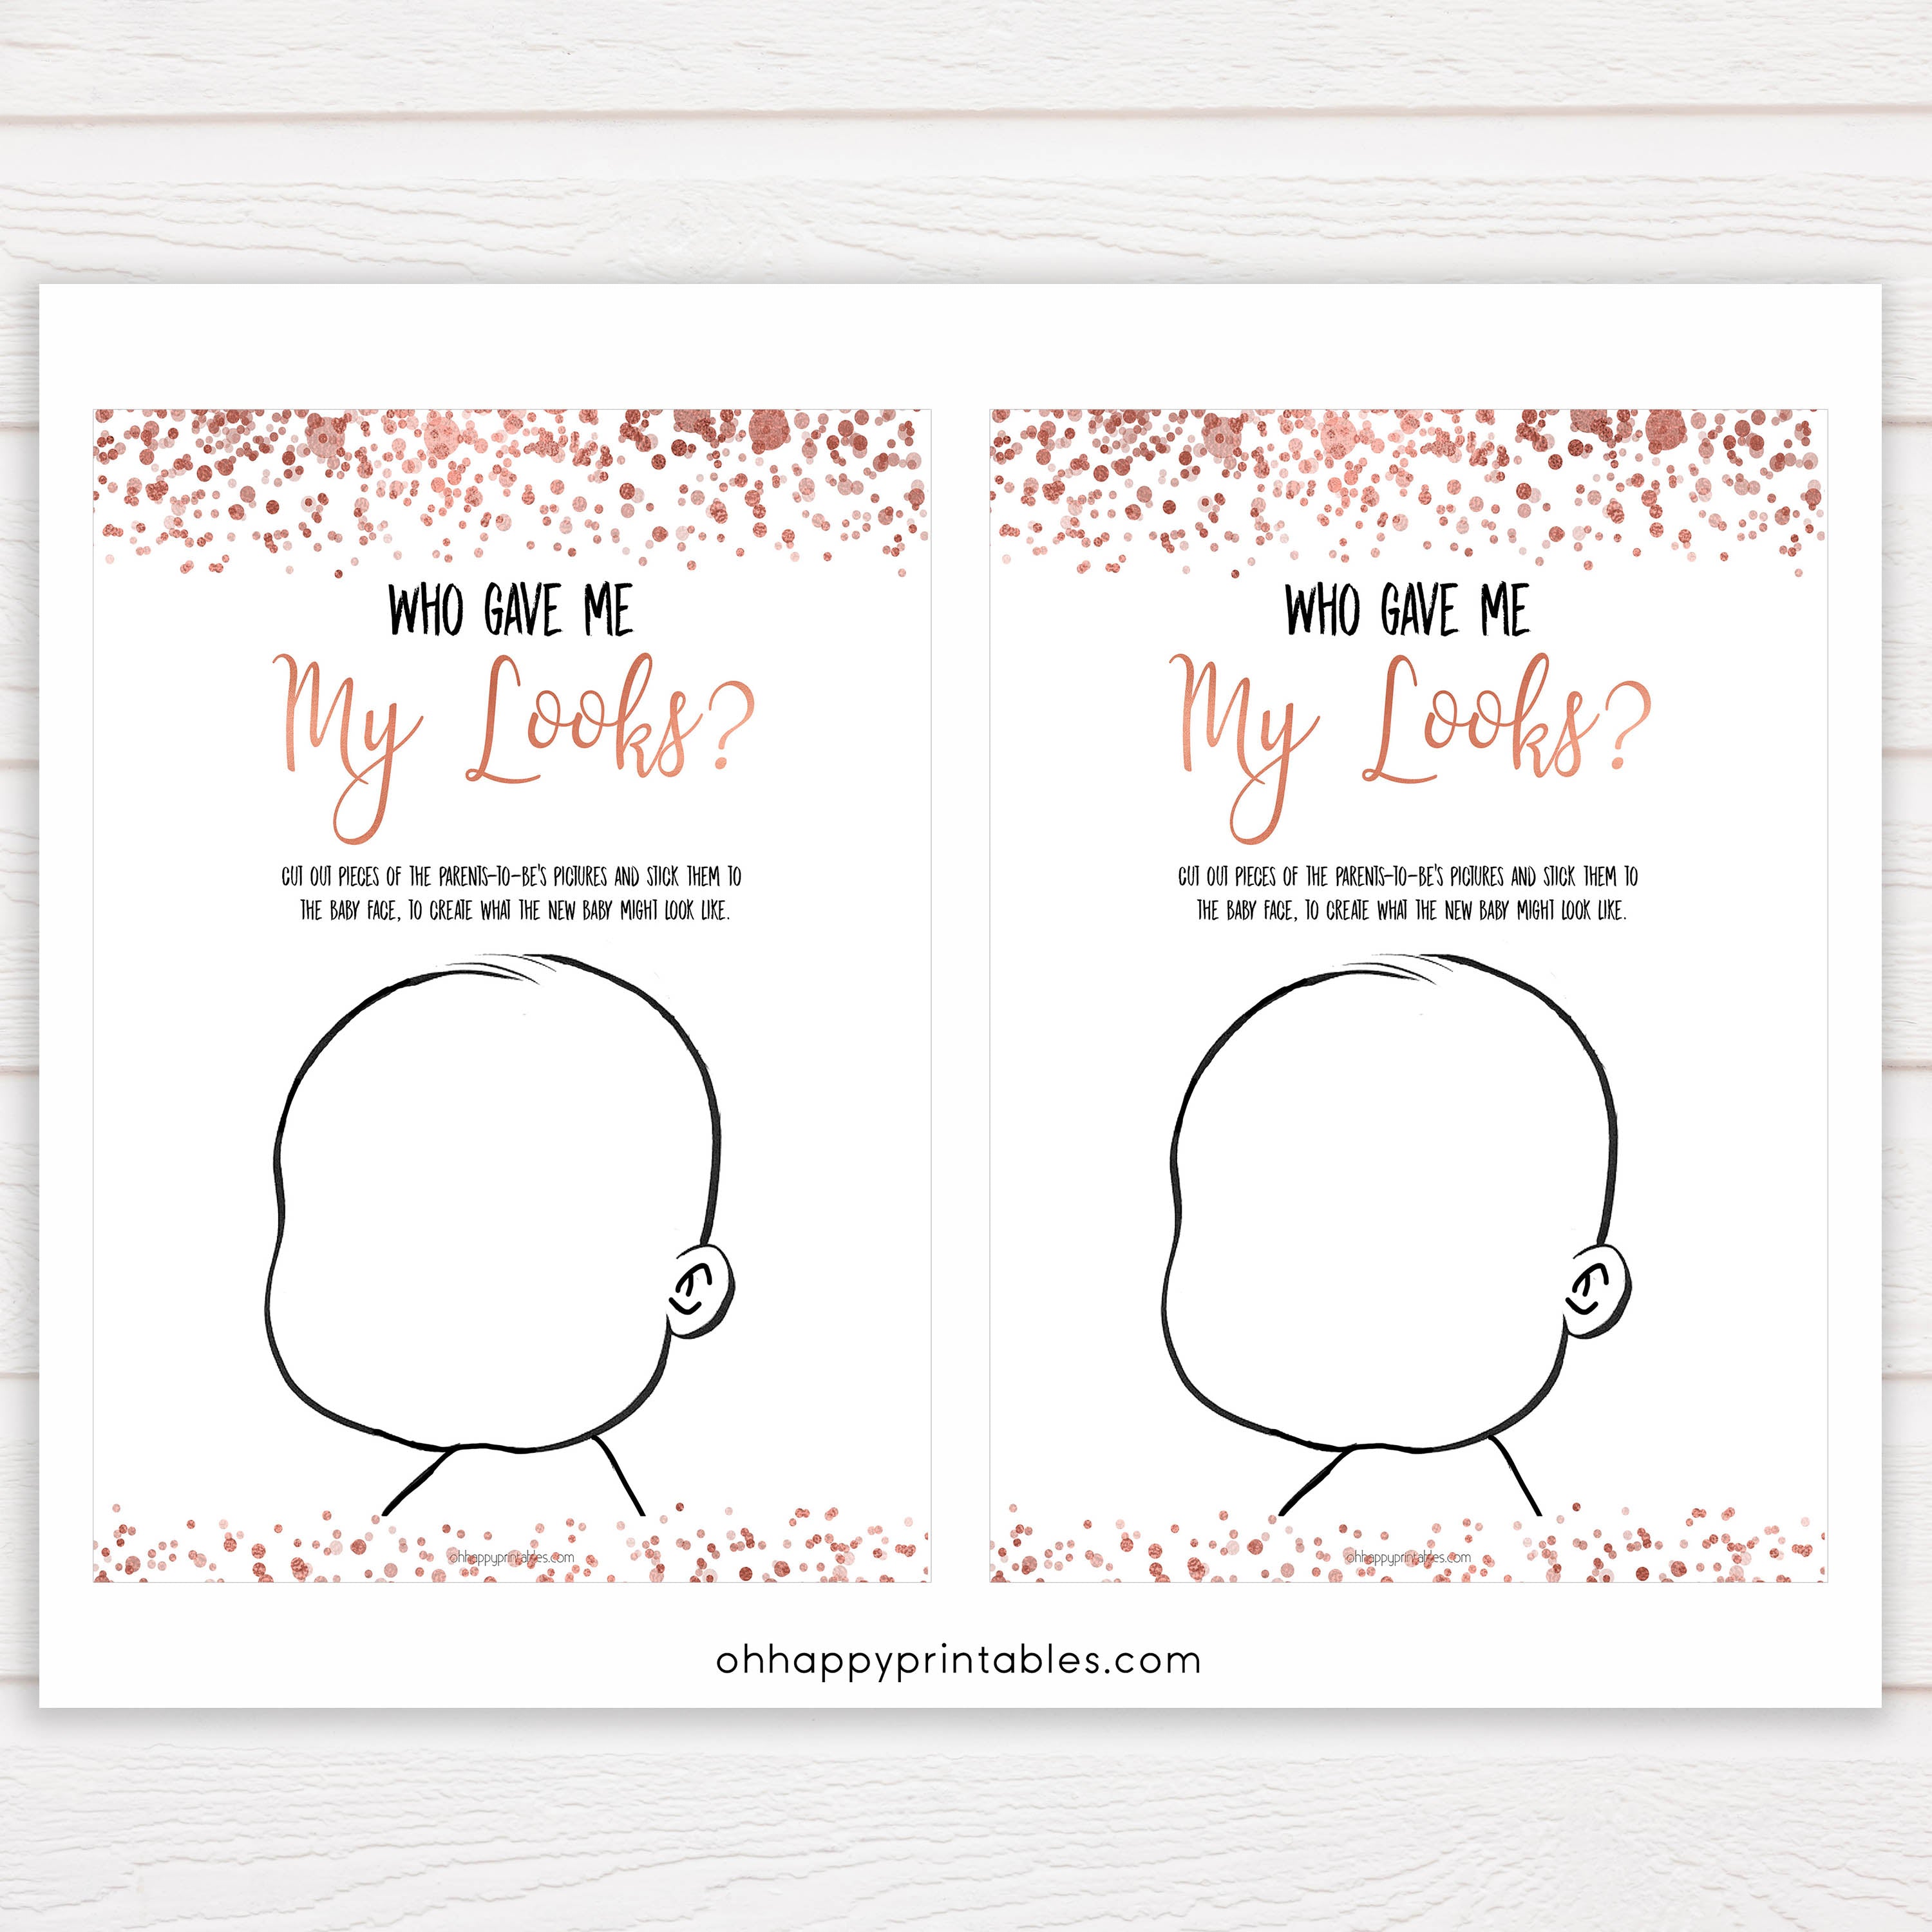 Rose Gold Baby Face Game, What Will Baby Look Like, Baby Face, Guess The Looks, Printable Baby Shower Game, Baby Face, Baby Shower Games, who gave me my looks, printable baby shower games, fun baby shower games, popular baby shower games